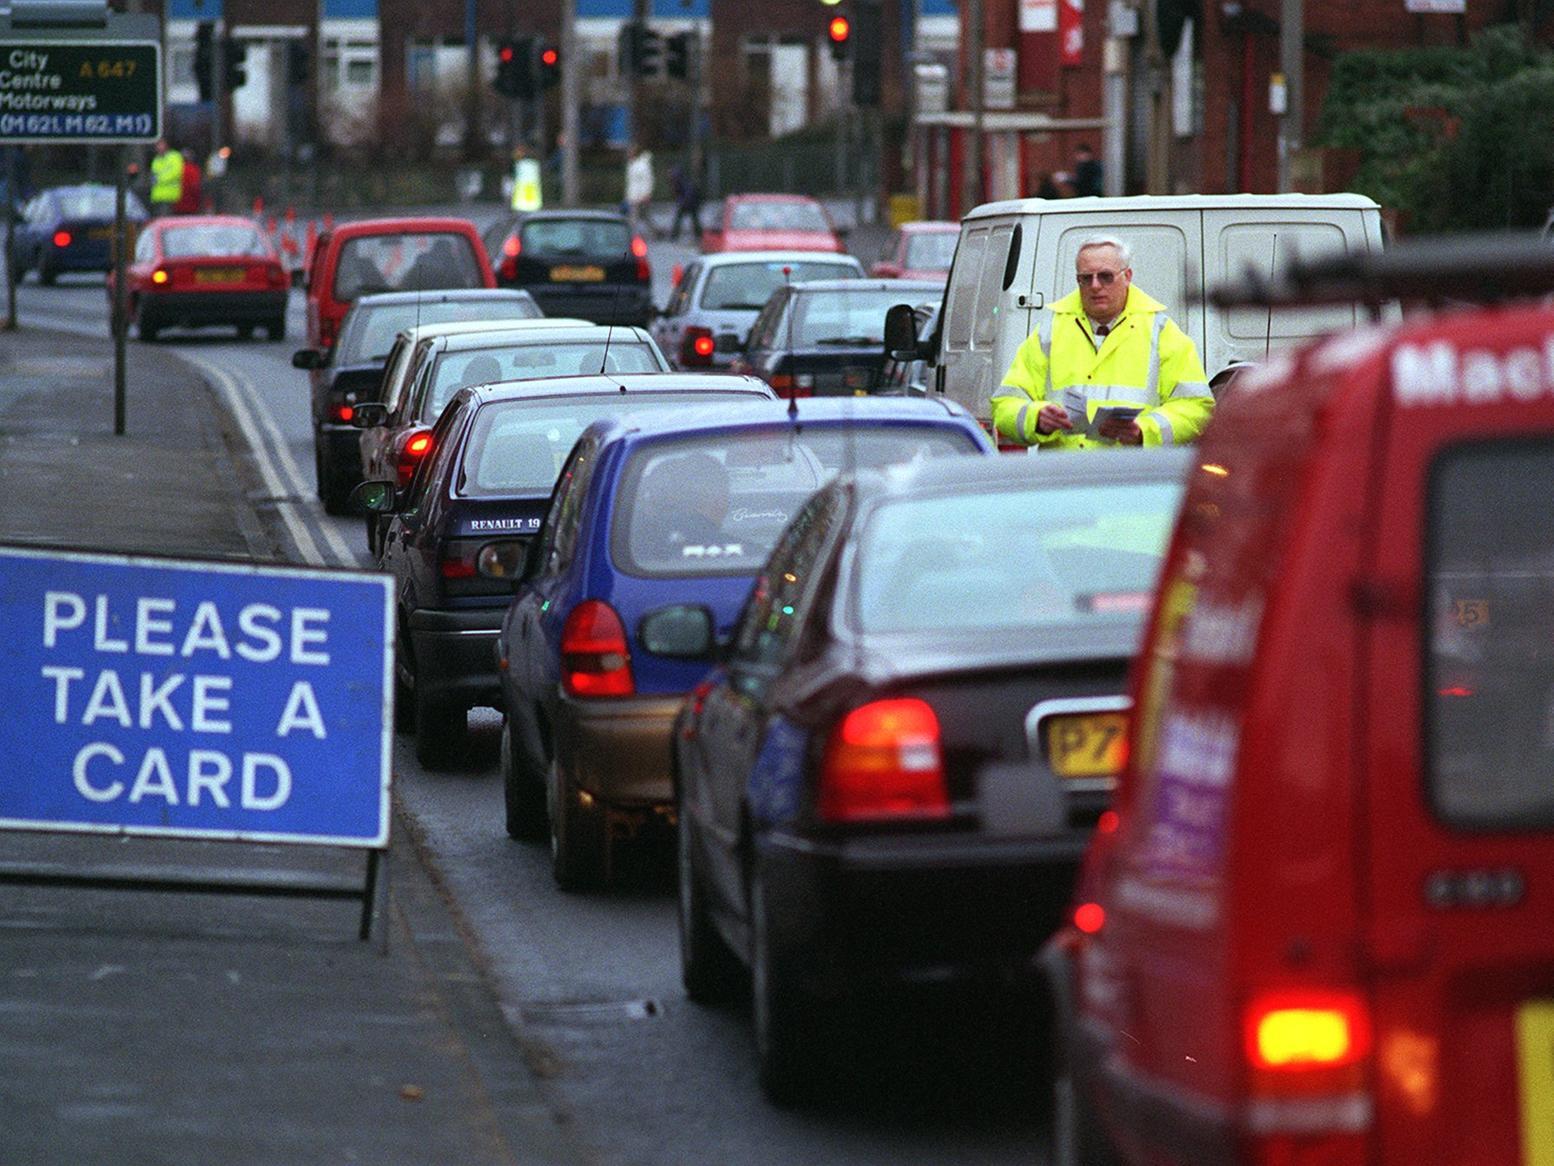 The high occupancy vehicle lane on Stanningley Road in Leeds was launched.